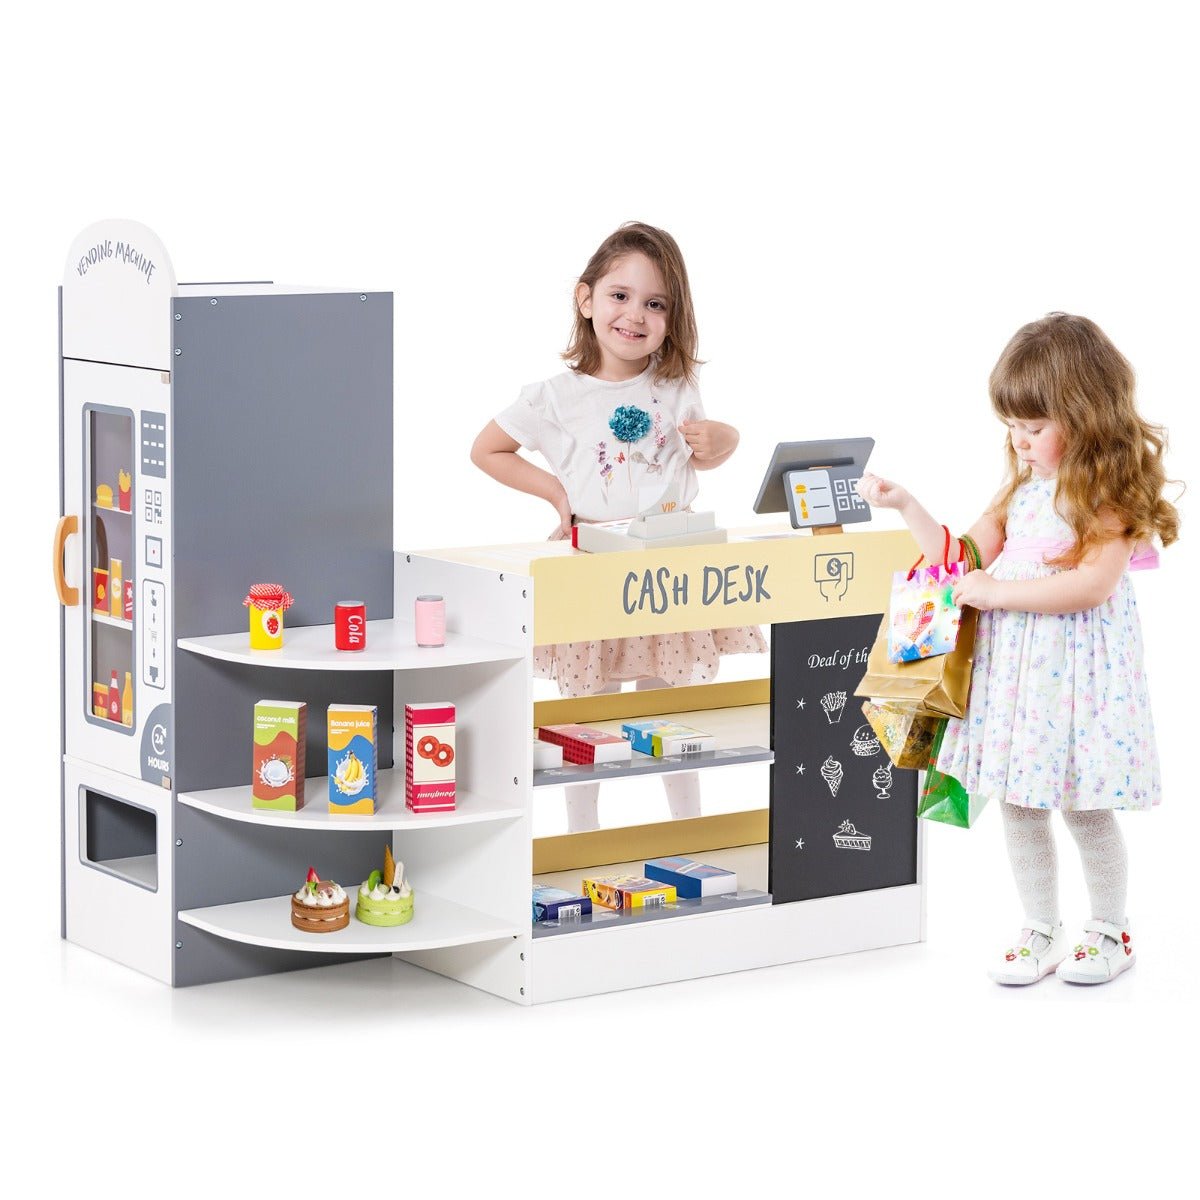 All-in-One White Grocery Store for Imaginative Play